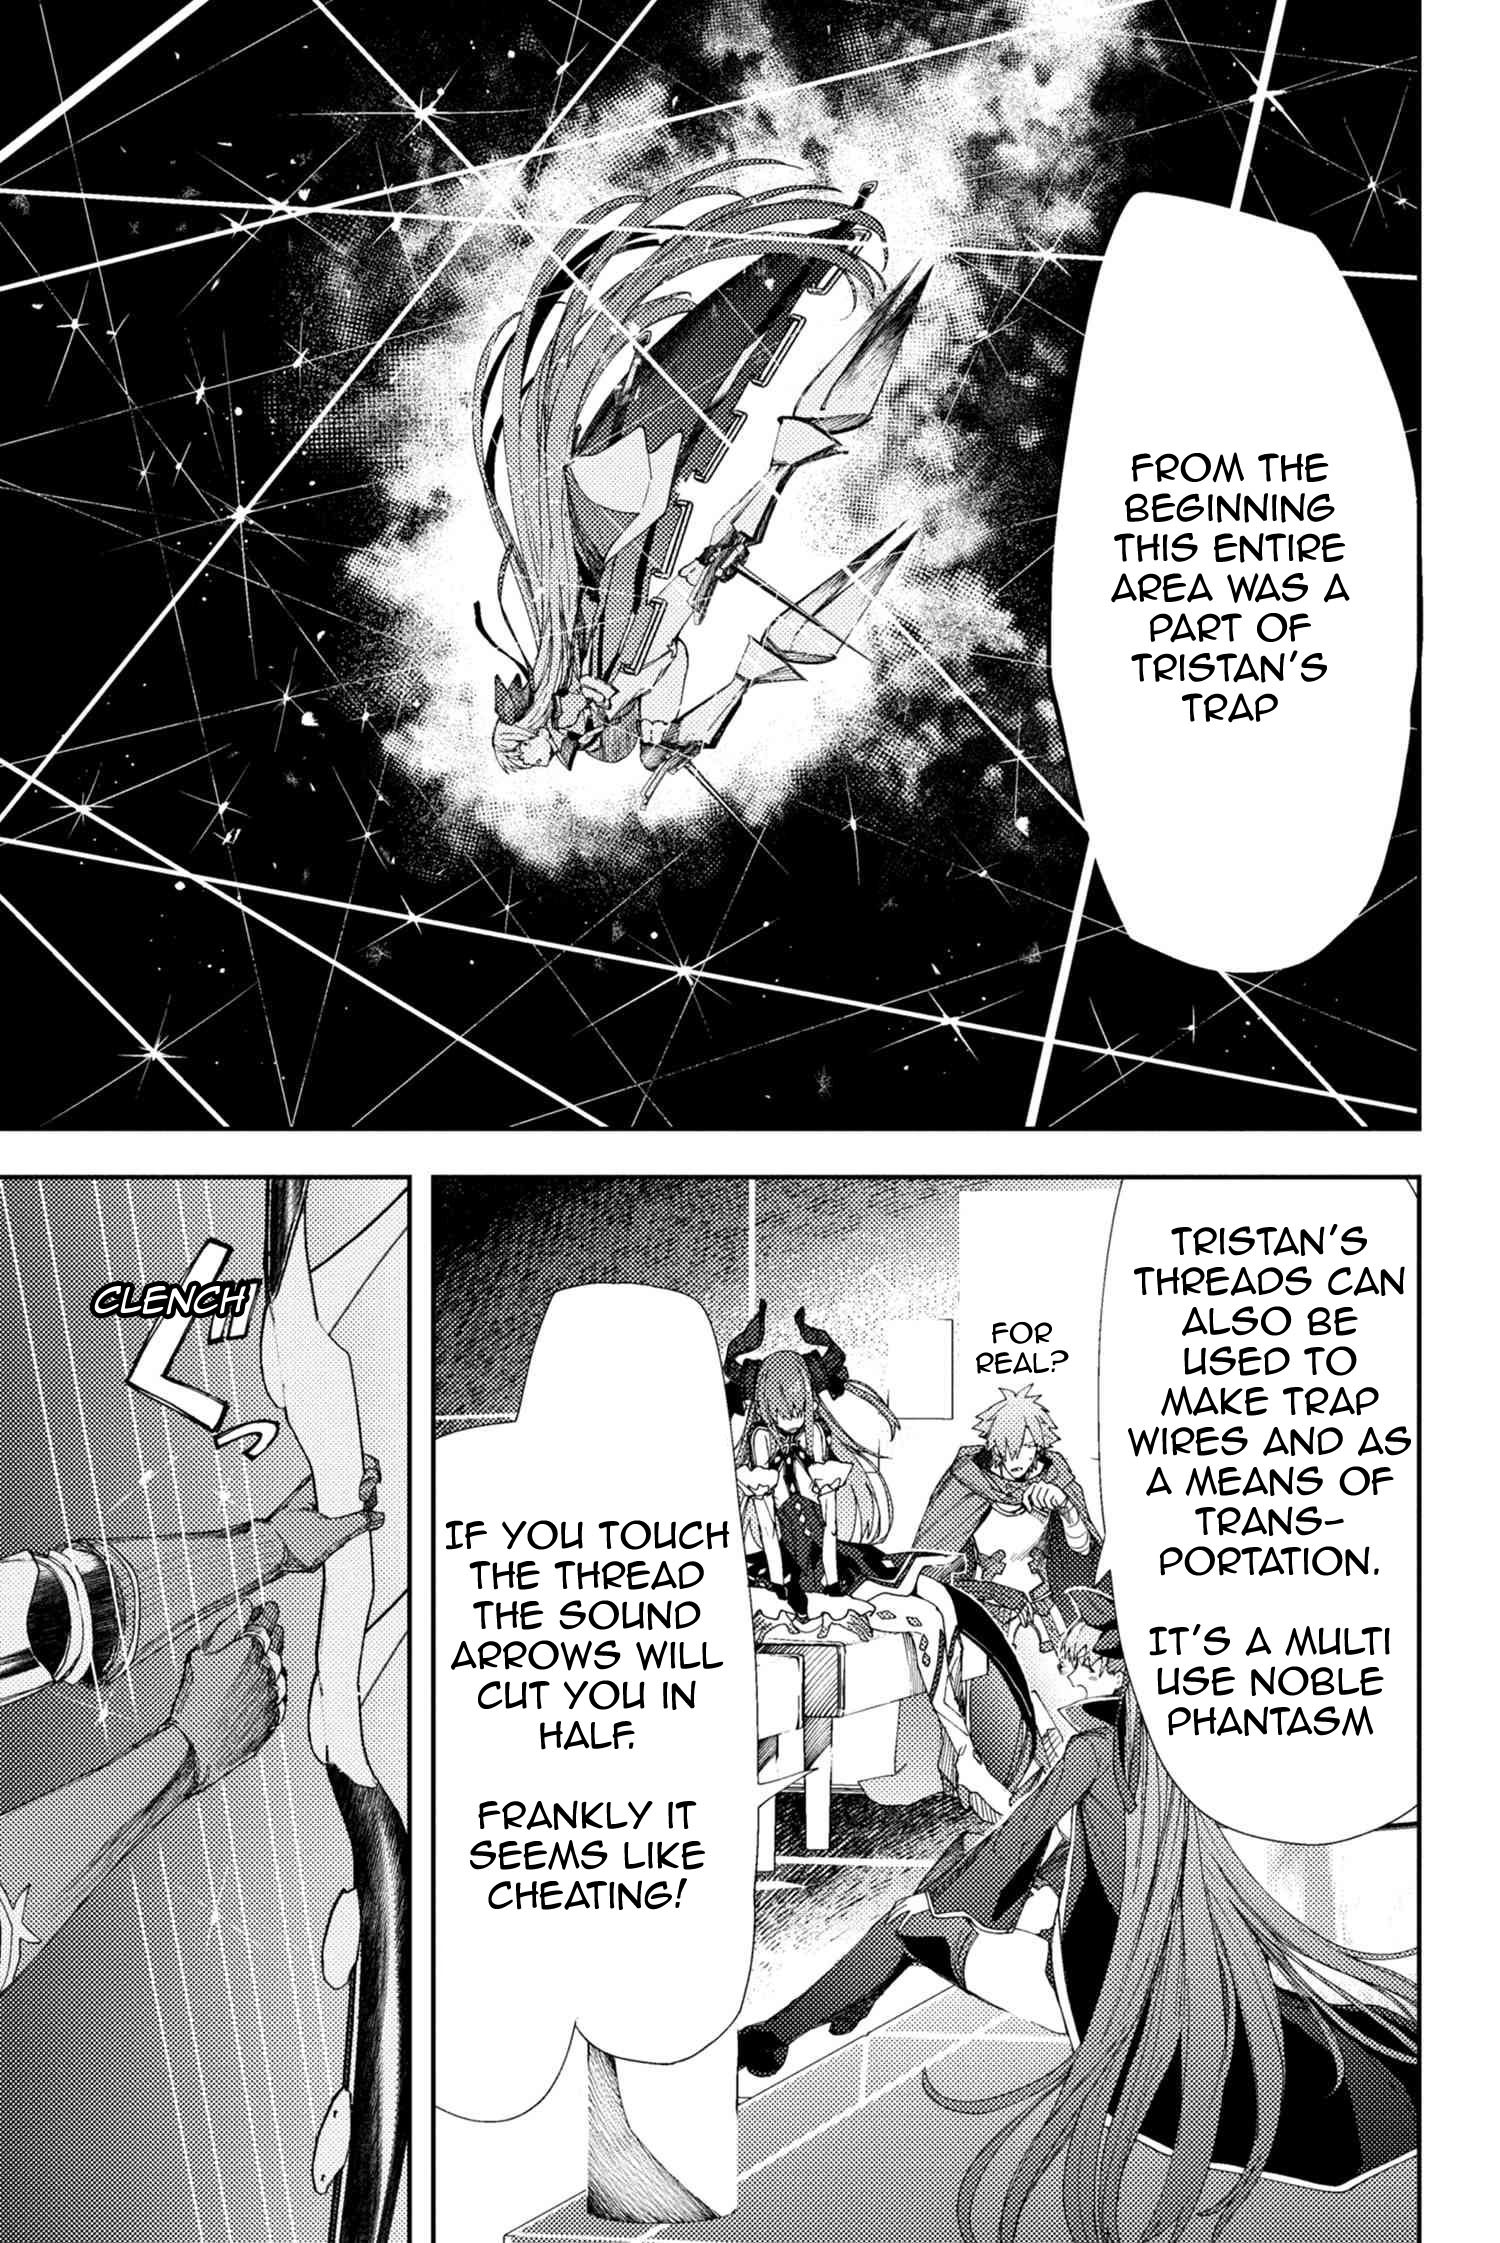 Fate/Grand Order -Epic of Remnant- Deep Sea Cyber-Paradise SE.RA.PH vol.1 ch.6.1